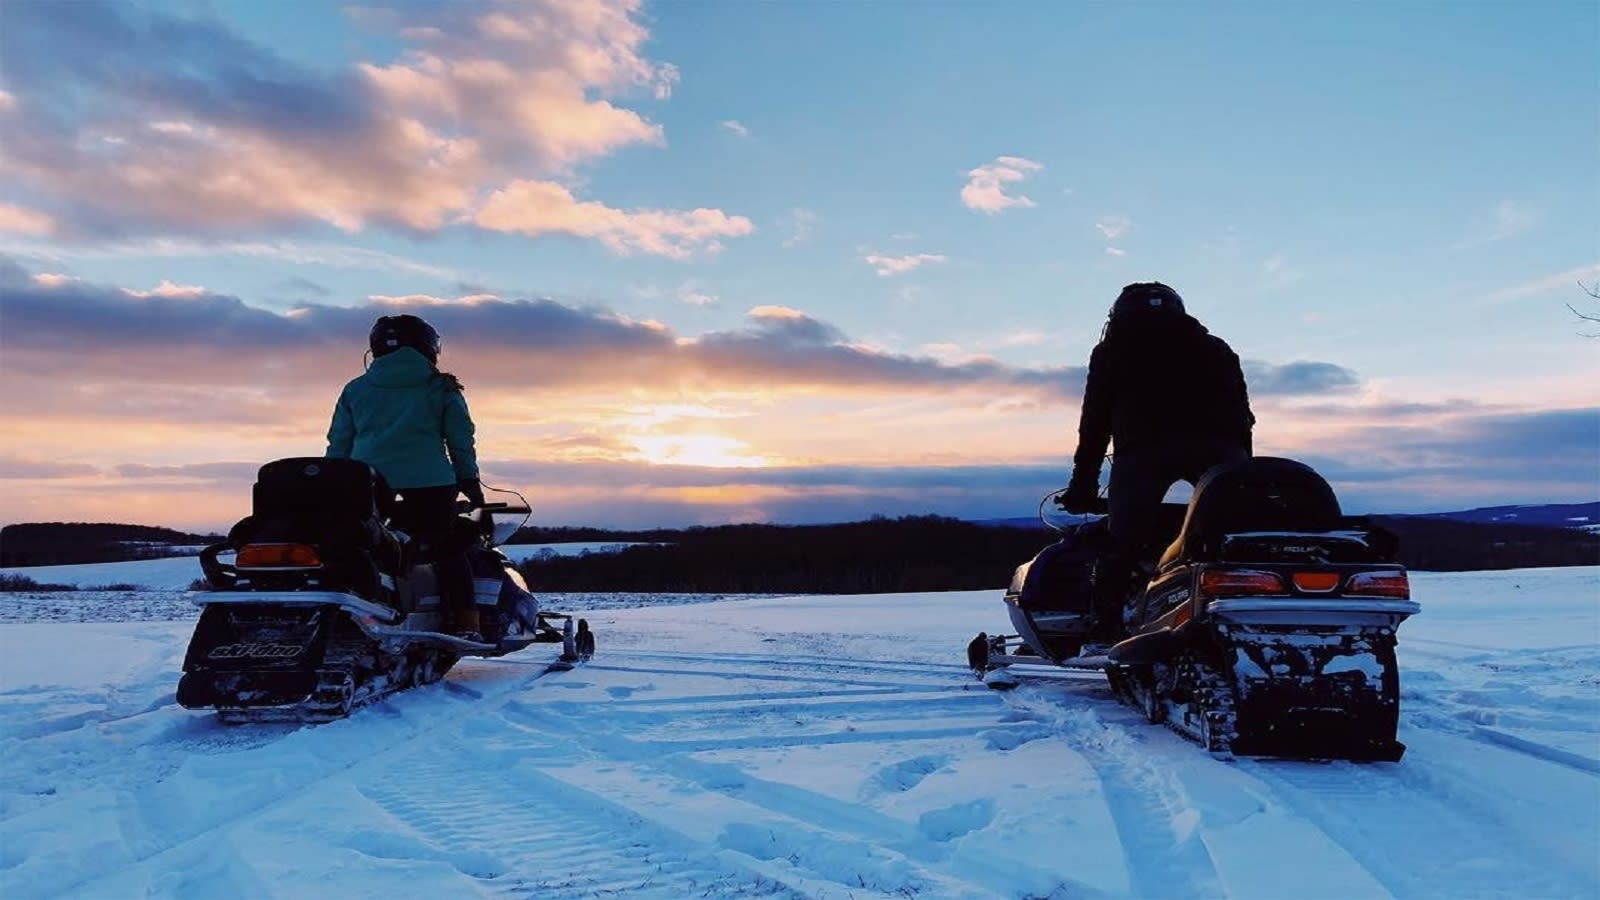 Snowmobiling in the Laurel Highlands can be an exhilarating experience.